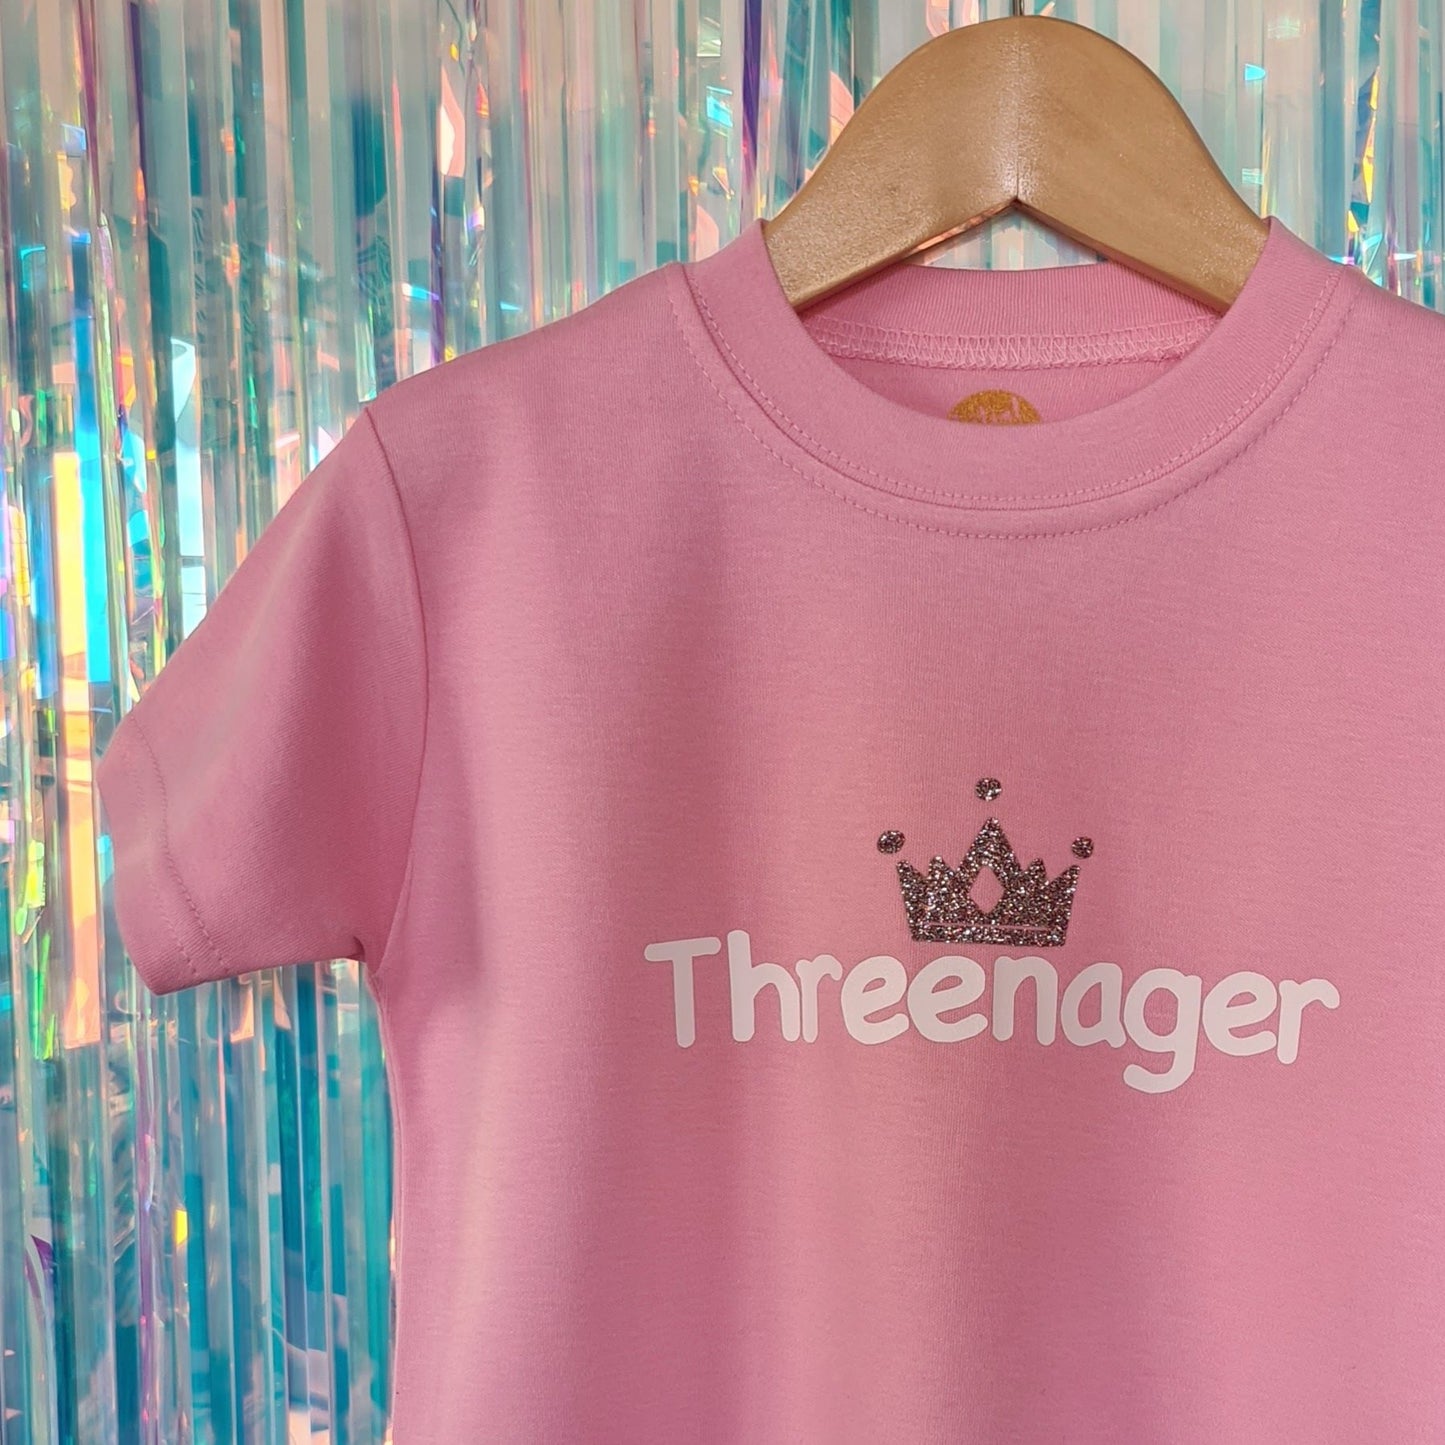 threenager - pale pink tshirt with white text and pink glitter crown